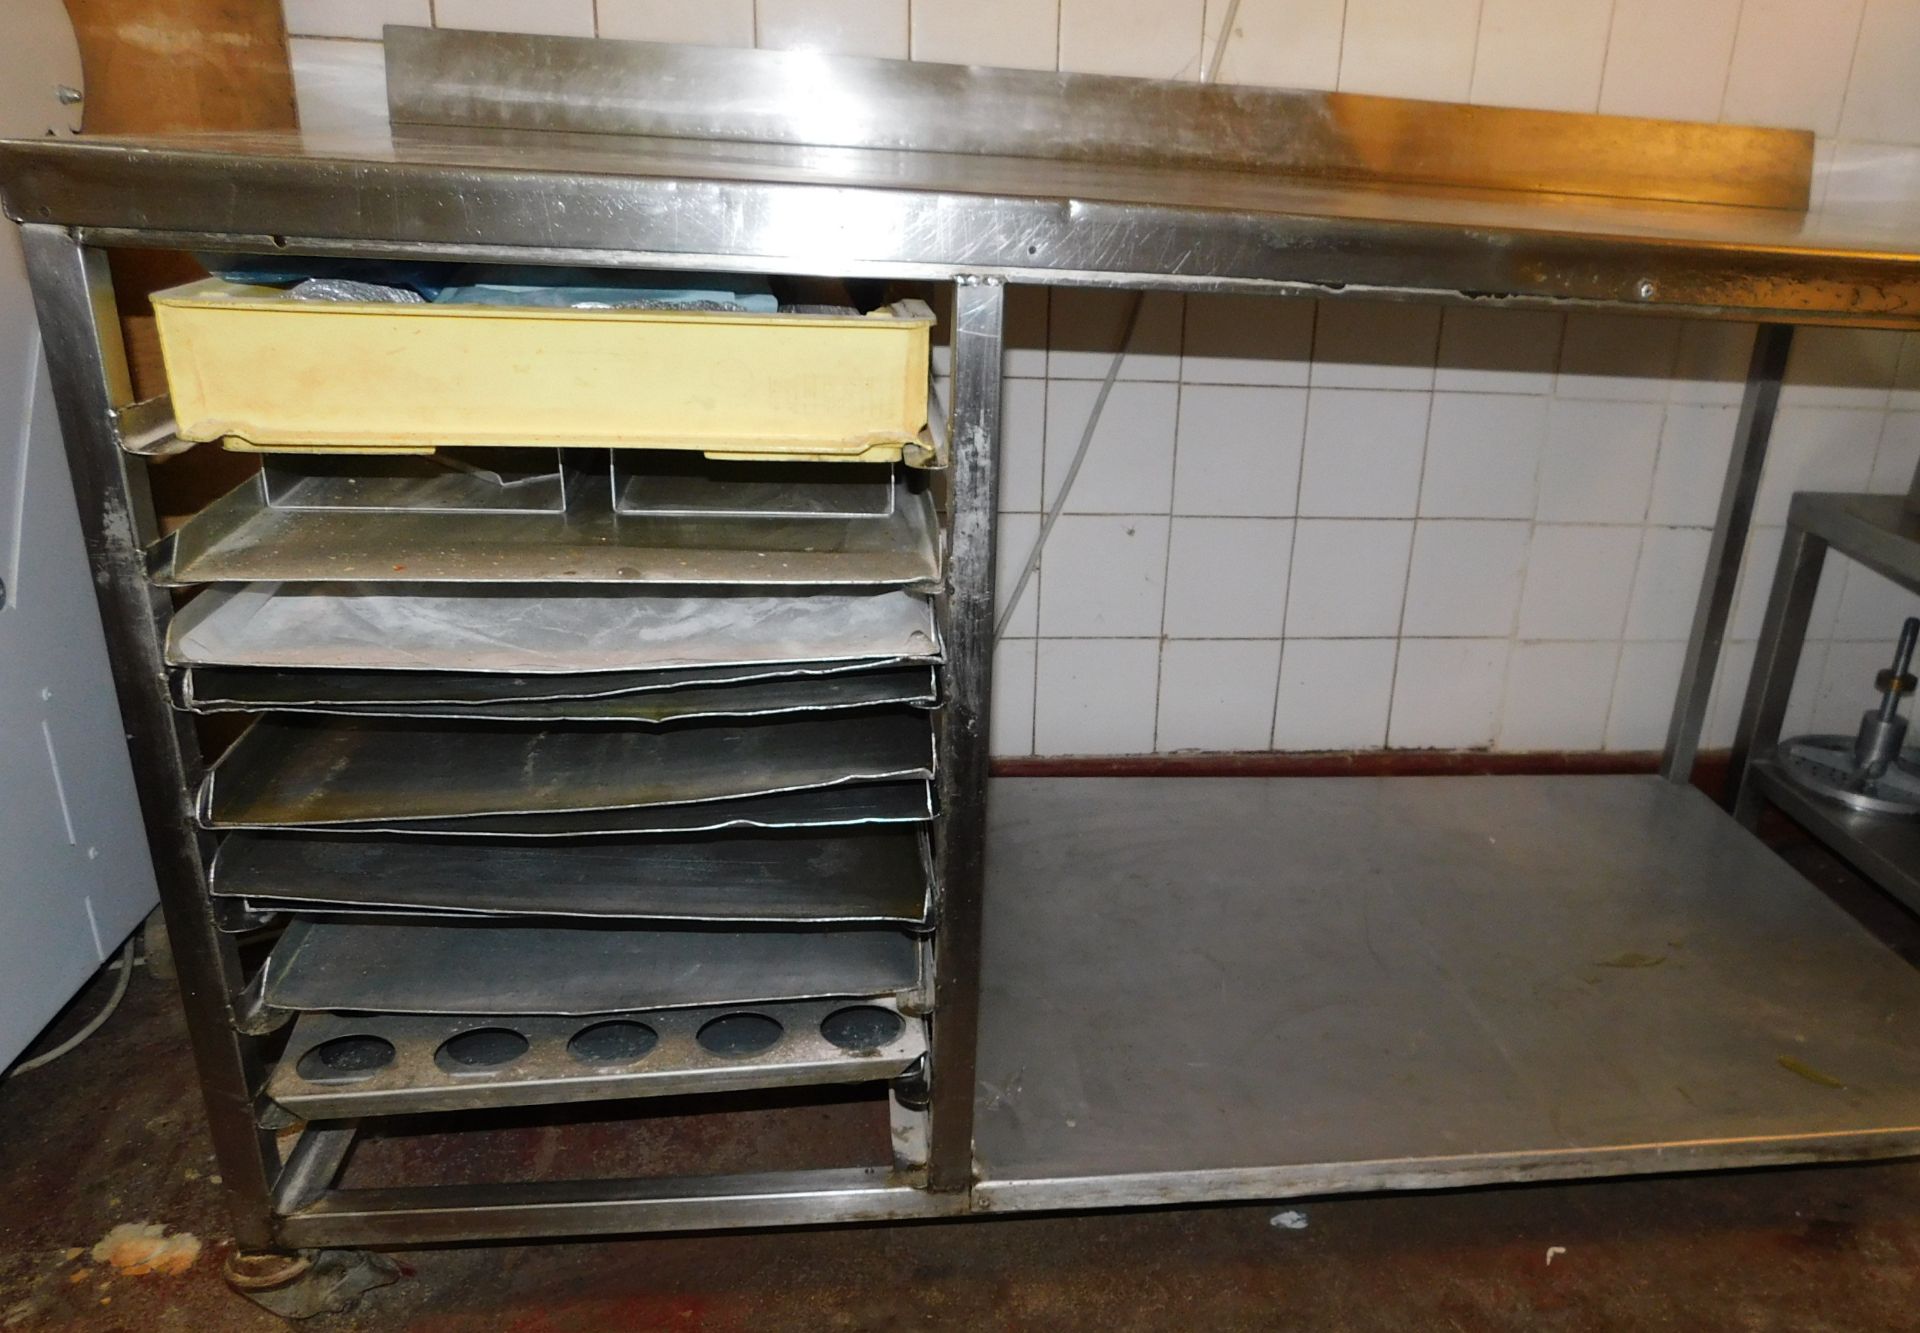 Mobile Large Stainless Steel Preparation Table with Baking Tray Section Underneath (Located - Image 3 of 3